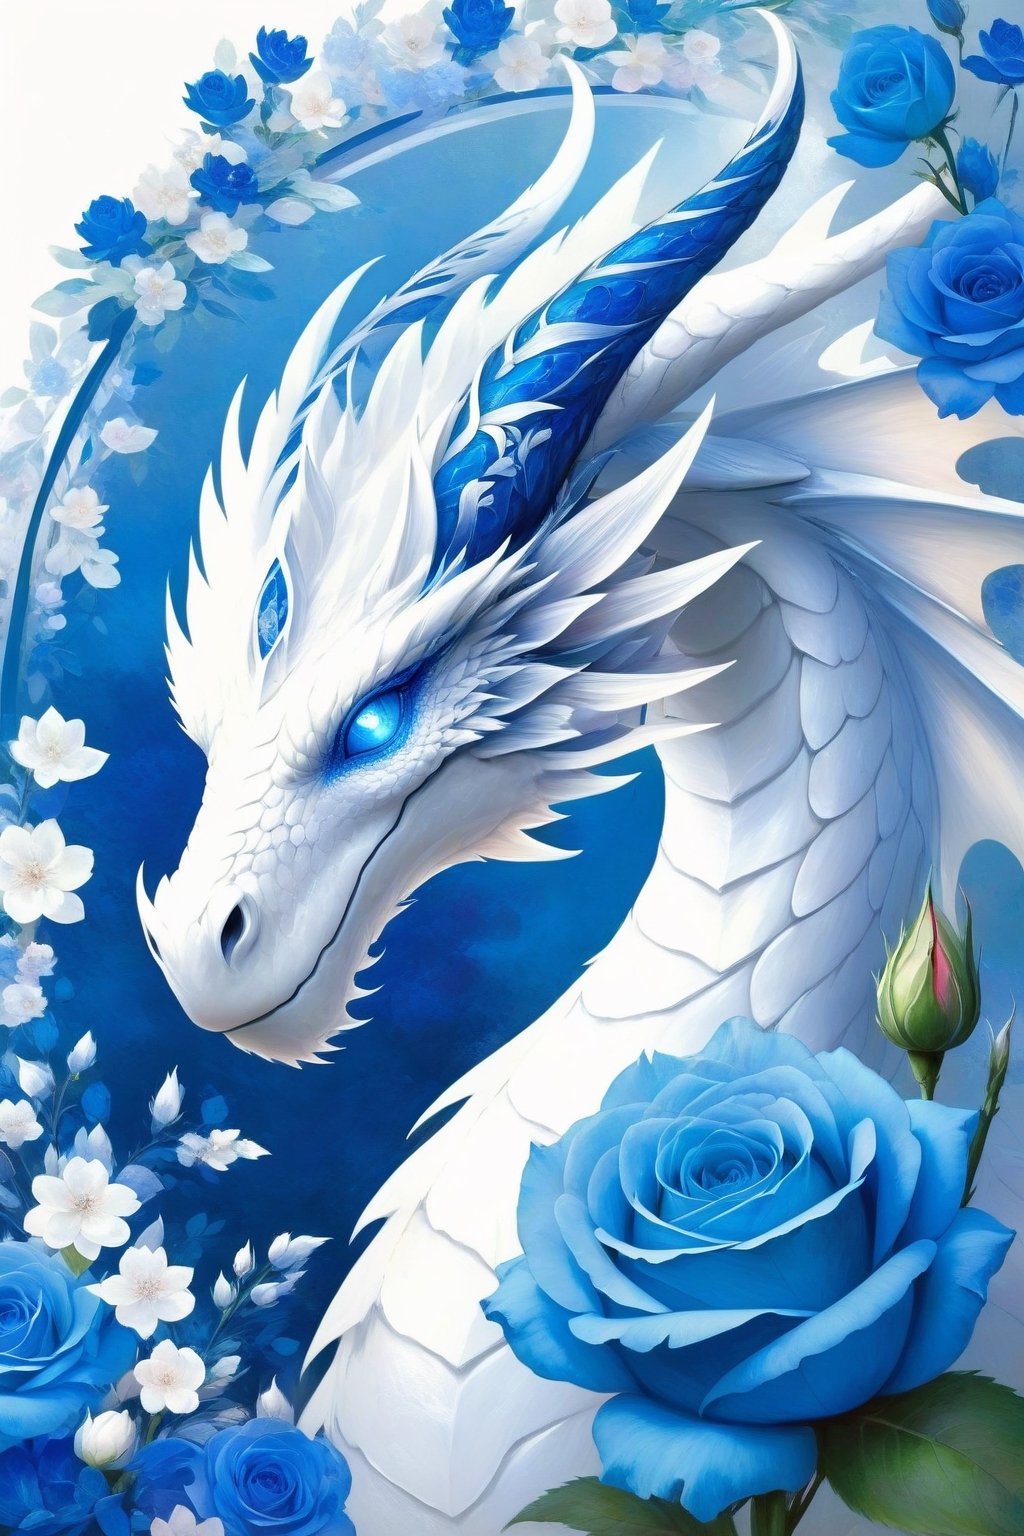  draco_fantasy, oil painting style, blue eyes, white dragon, blue flowers, rose, A dragon adorned with blossoming blue flowers, simple background, white background, symbolizing a blend of power and elegance